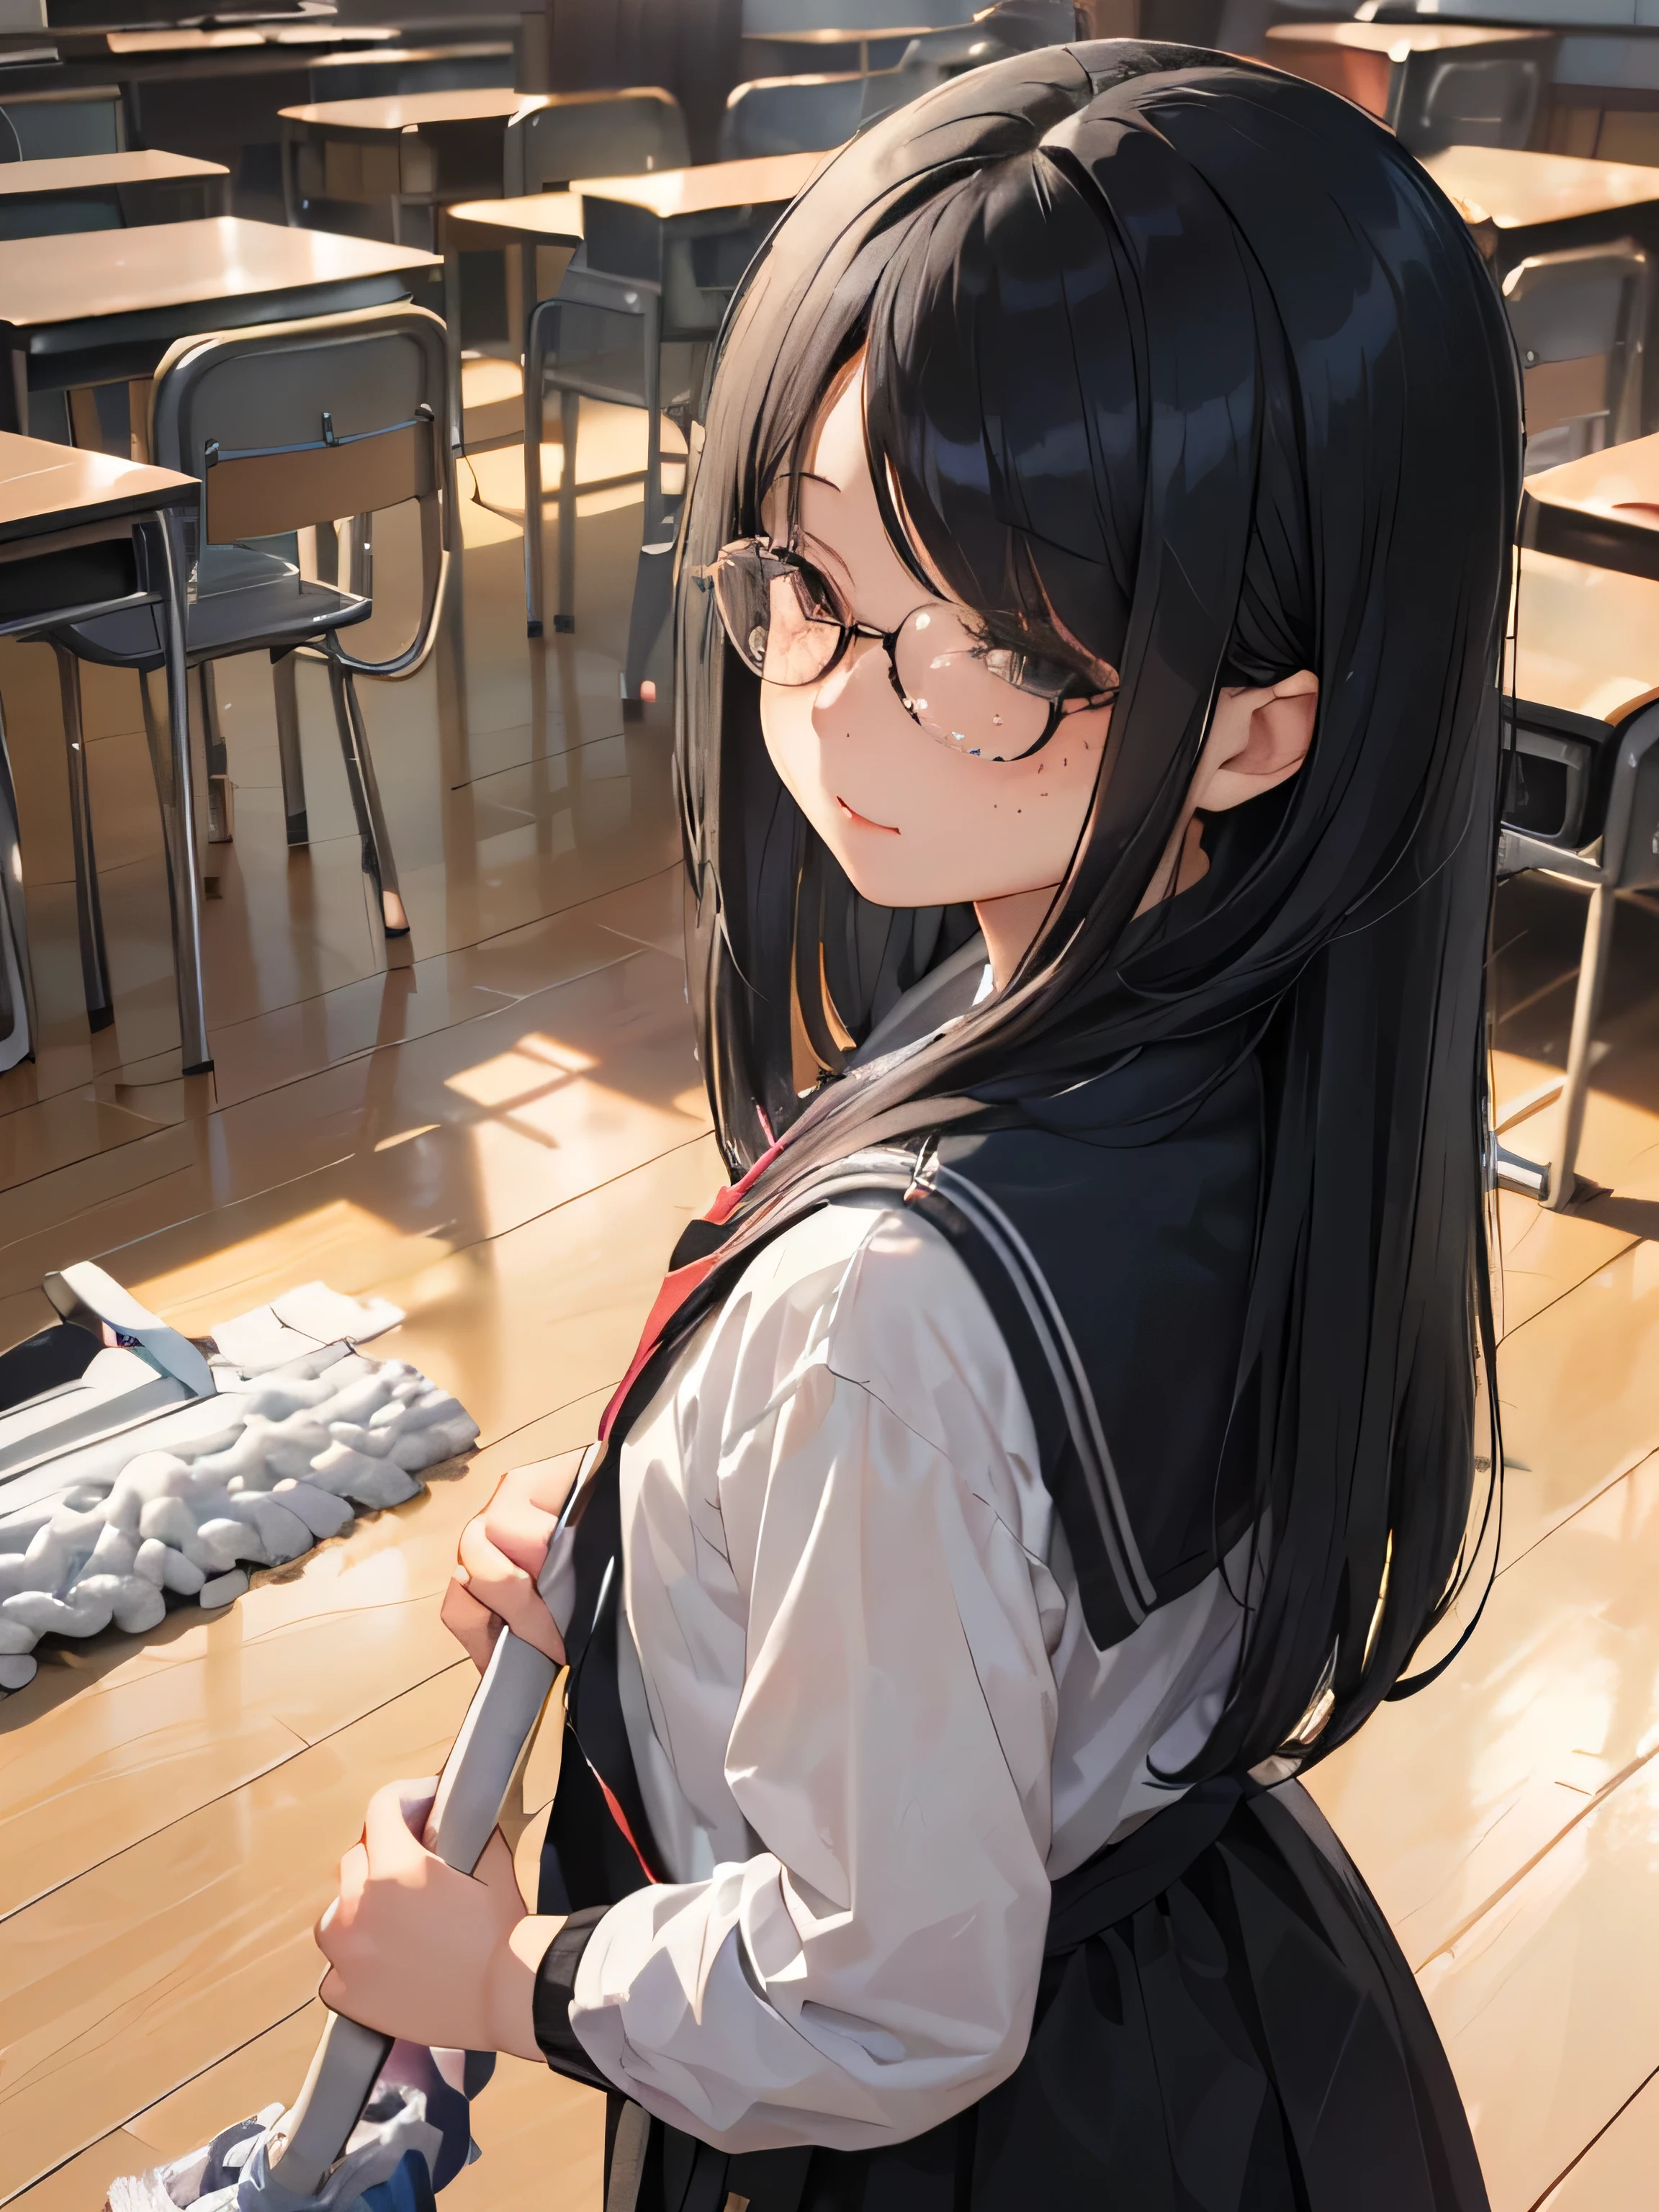 (((1 girl)))(((classroom、Get up and clean the floor with a mop:1.3、With mop in both hands:1.2)))、13 years old、Middle school students２grade、sailor suit、black tights、student bag、、low length、(((((long bangs hide the eyes:1.5)))))、((freckles))、((((long black hair:1.2))))　(((hair band)))(((black rim glasses:1.2　black eye)))、clean、(((Are standing、With mop、mop the floor 1.3)))looking here、Upper body、think back